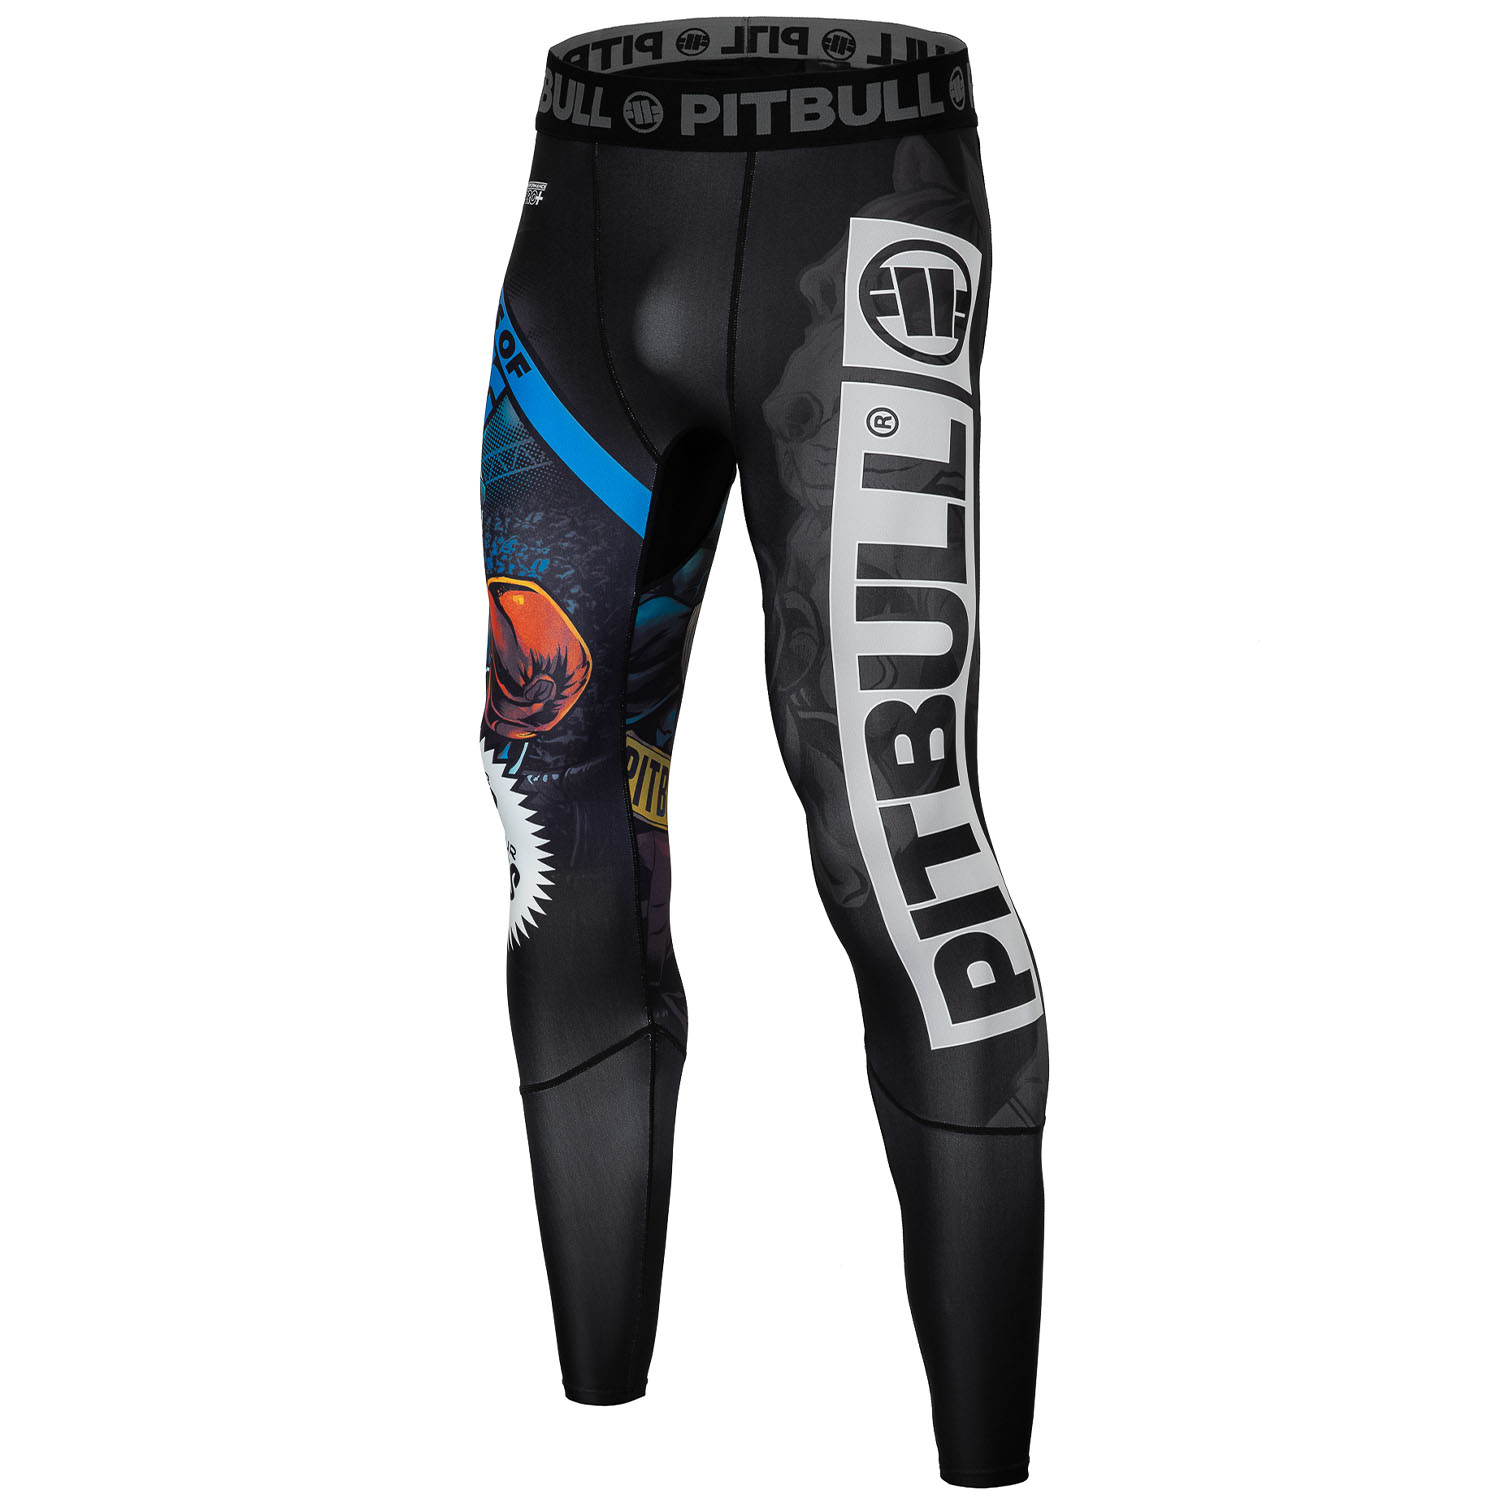 Pit Bull West Coast Compression Pants, Masters Of Boxing, schwarz